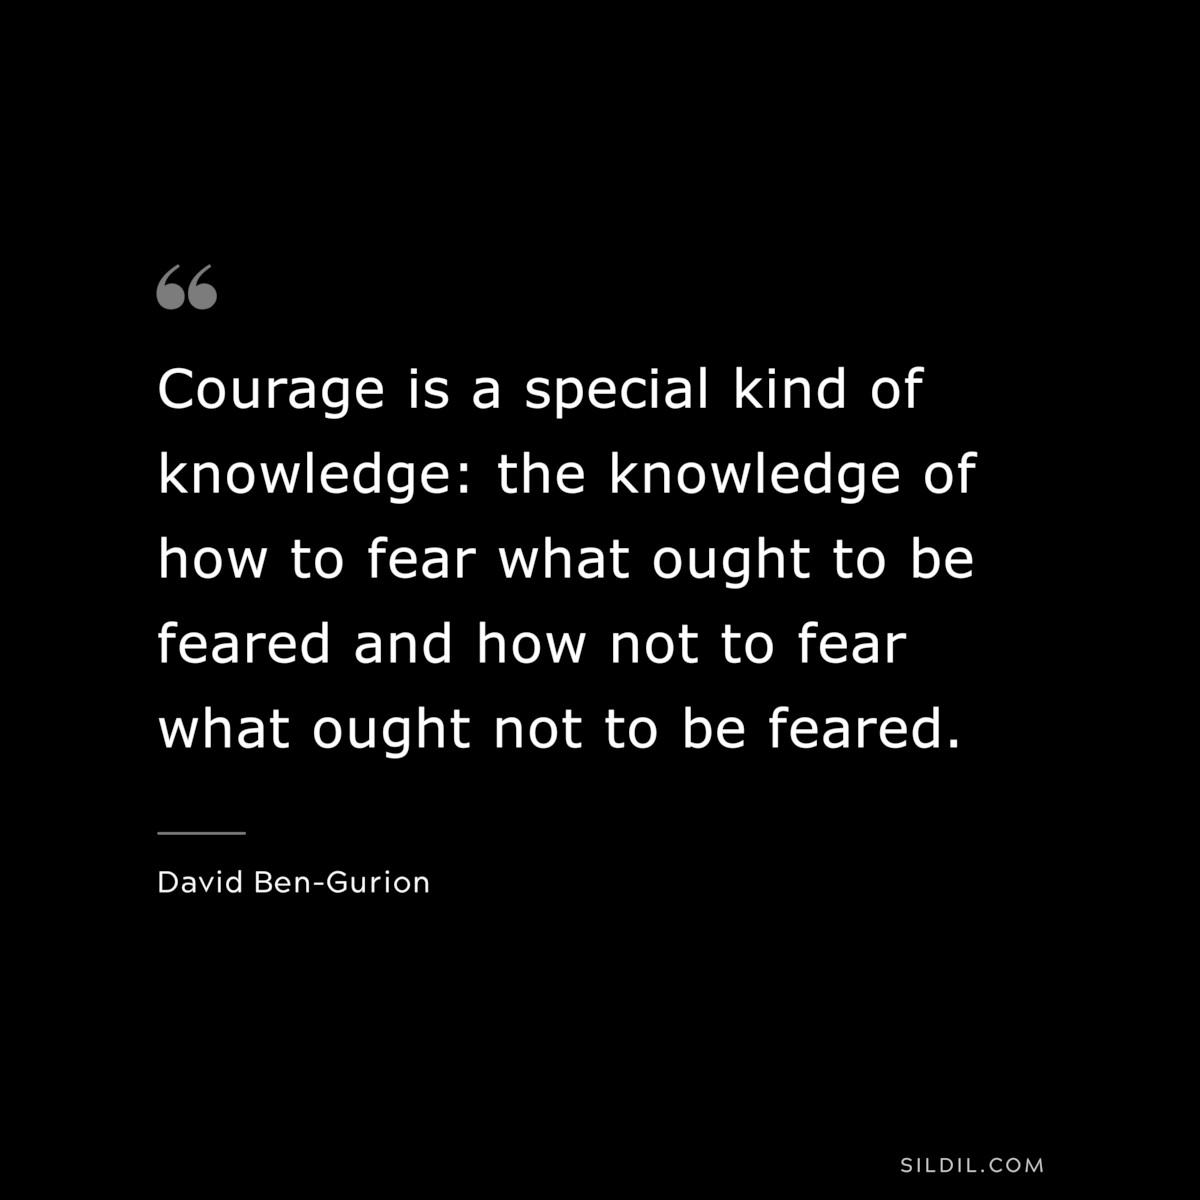 Courage is a special kind of knowledge: the knowledge of how to fear what ought to be feared and how not to fear what ought not to be feared. ― David Ben-Gurion